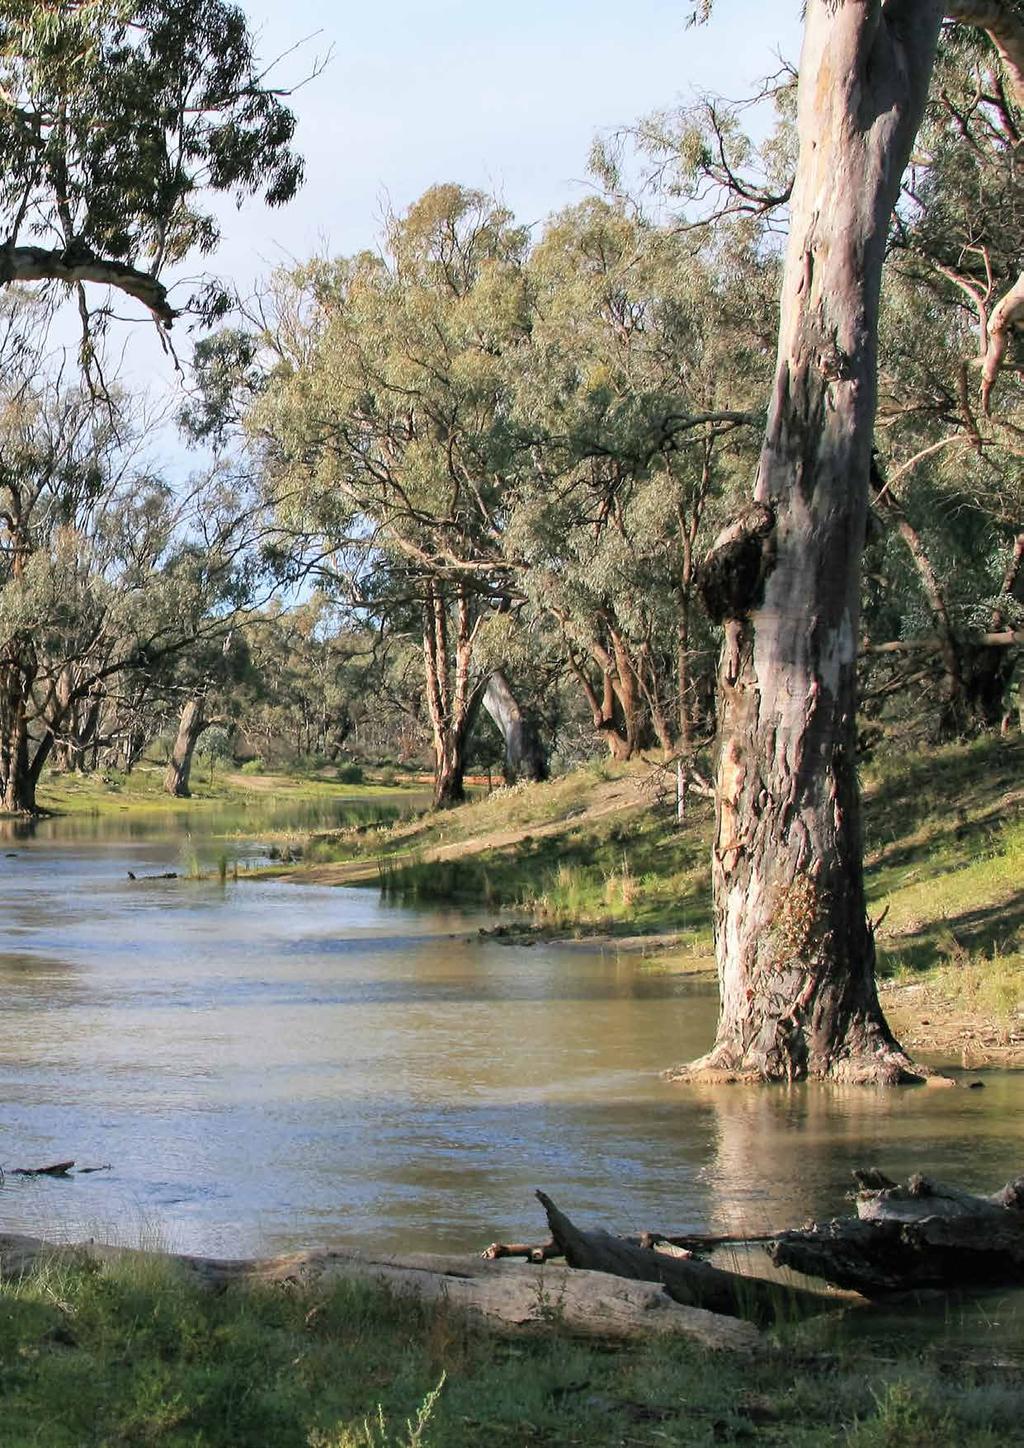 The Centre s work directly supports decision making regarding maintenance and restoration of the long-term health of rivers, catchments, floodplains and wetlands.